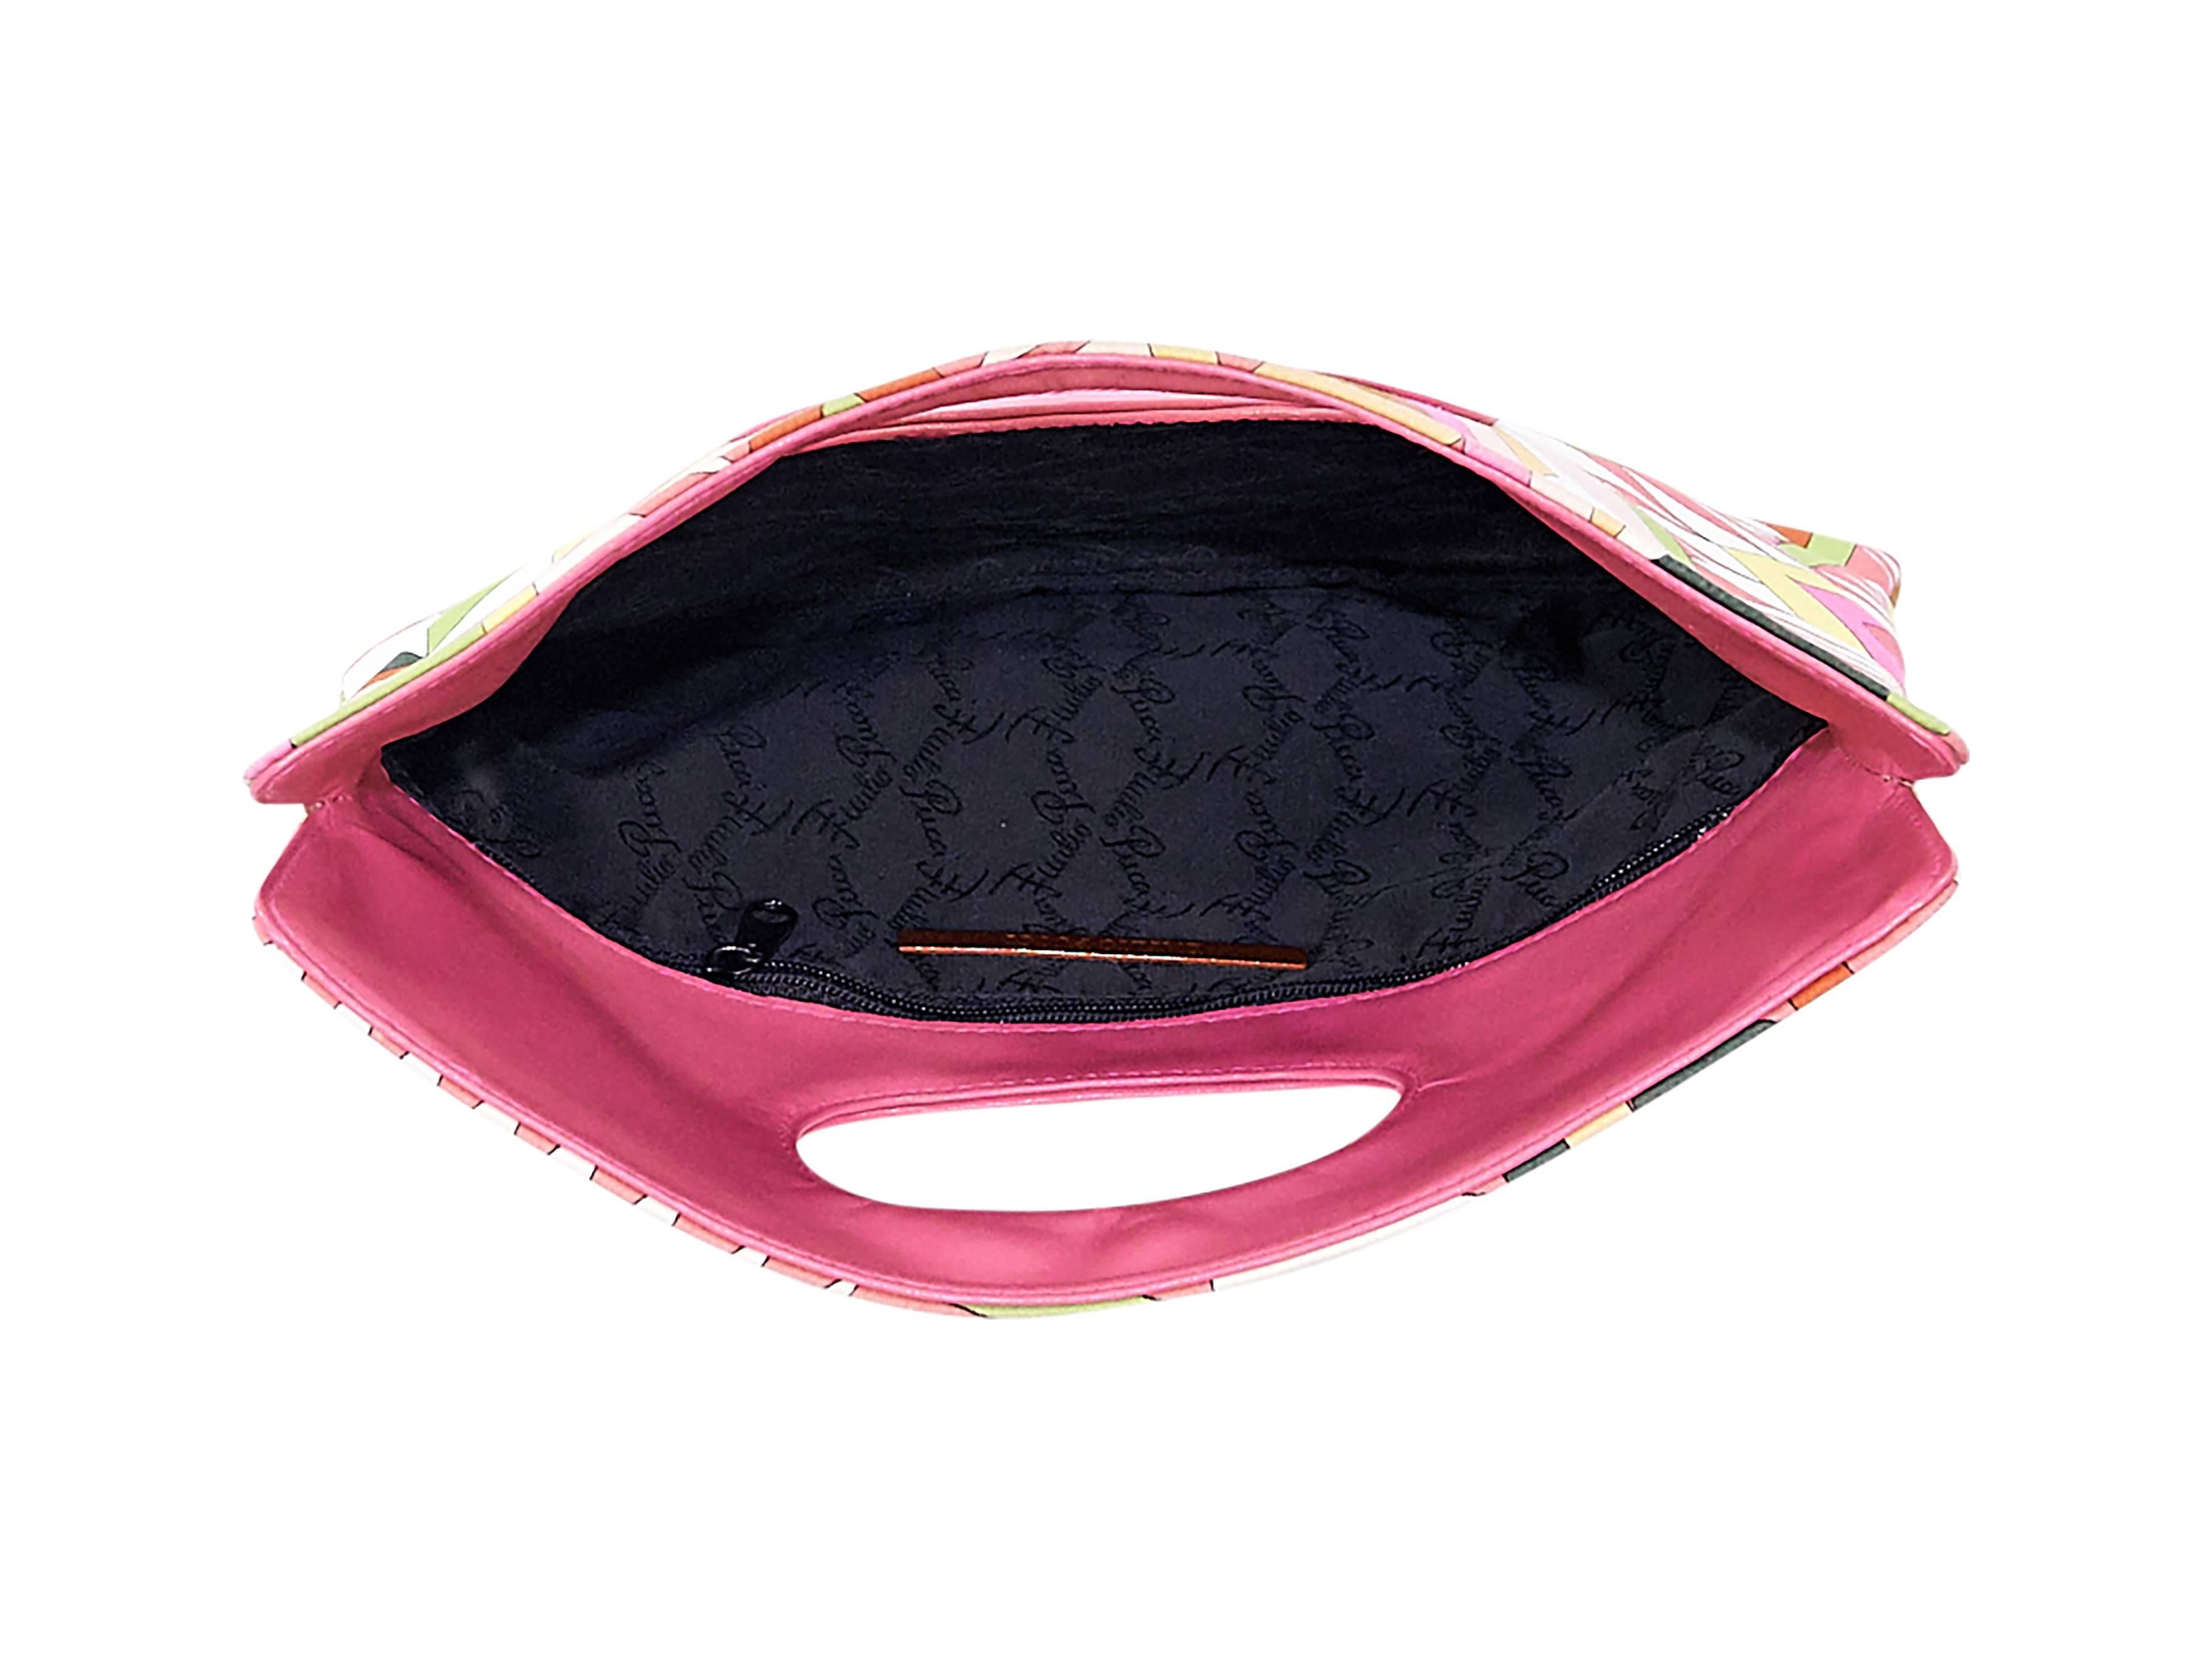 Product details:  Multicolor signature printed clutch by Emilio Pucci.  Foldover top with cutout handle.  Lined interior with inner zip pocket.  9.75"L x 10.75"H x 0.5"D.
Condition: Very good. 
Est. Retail $ 398.00